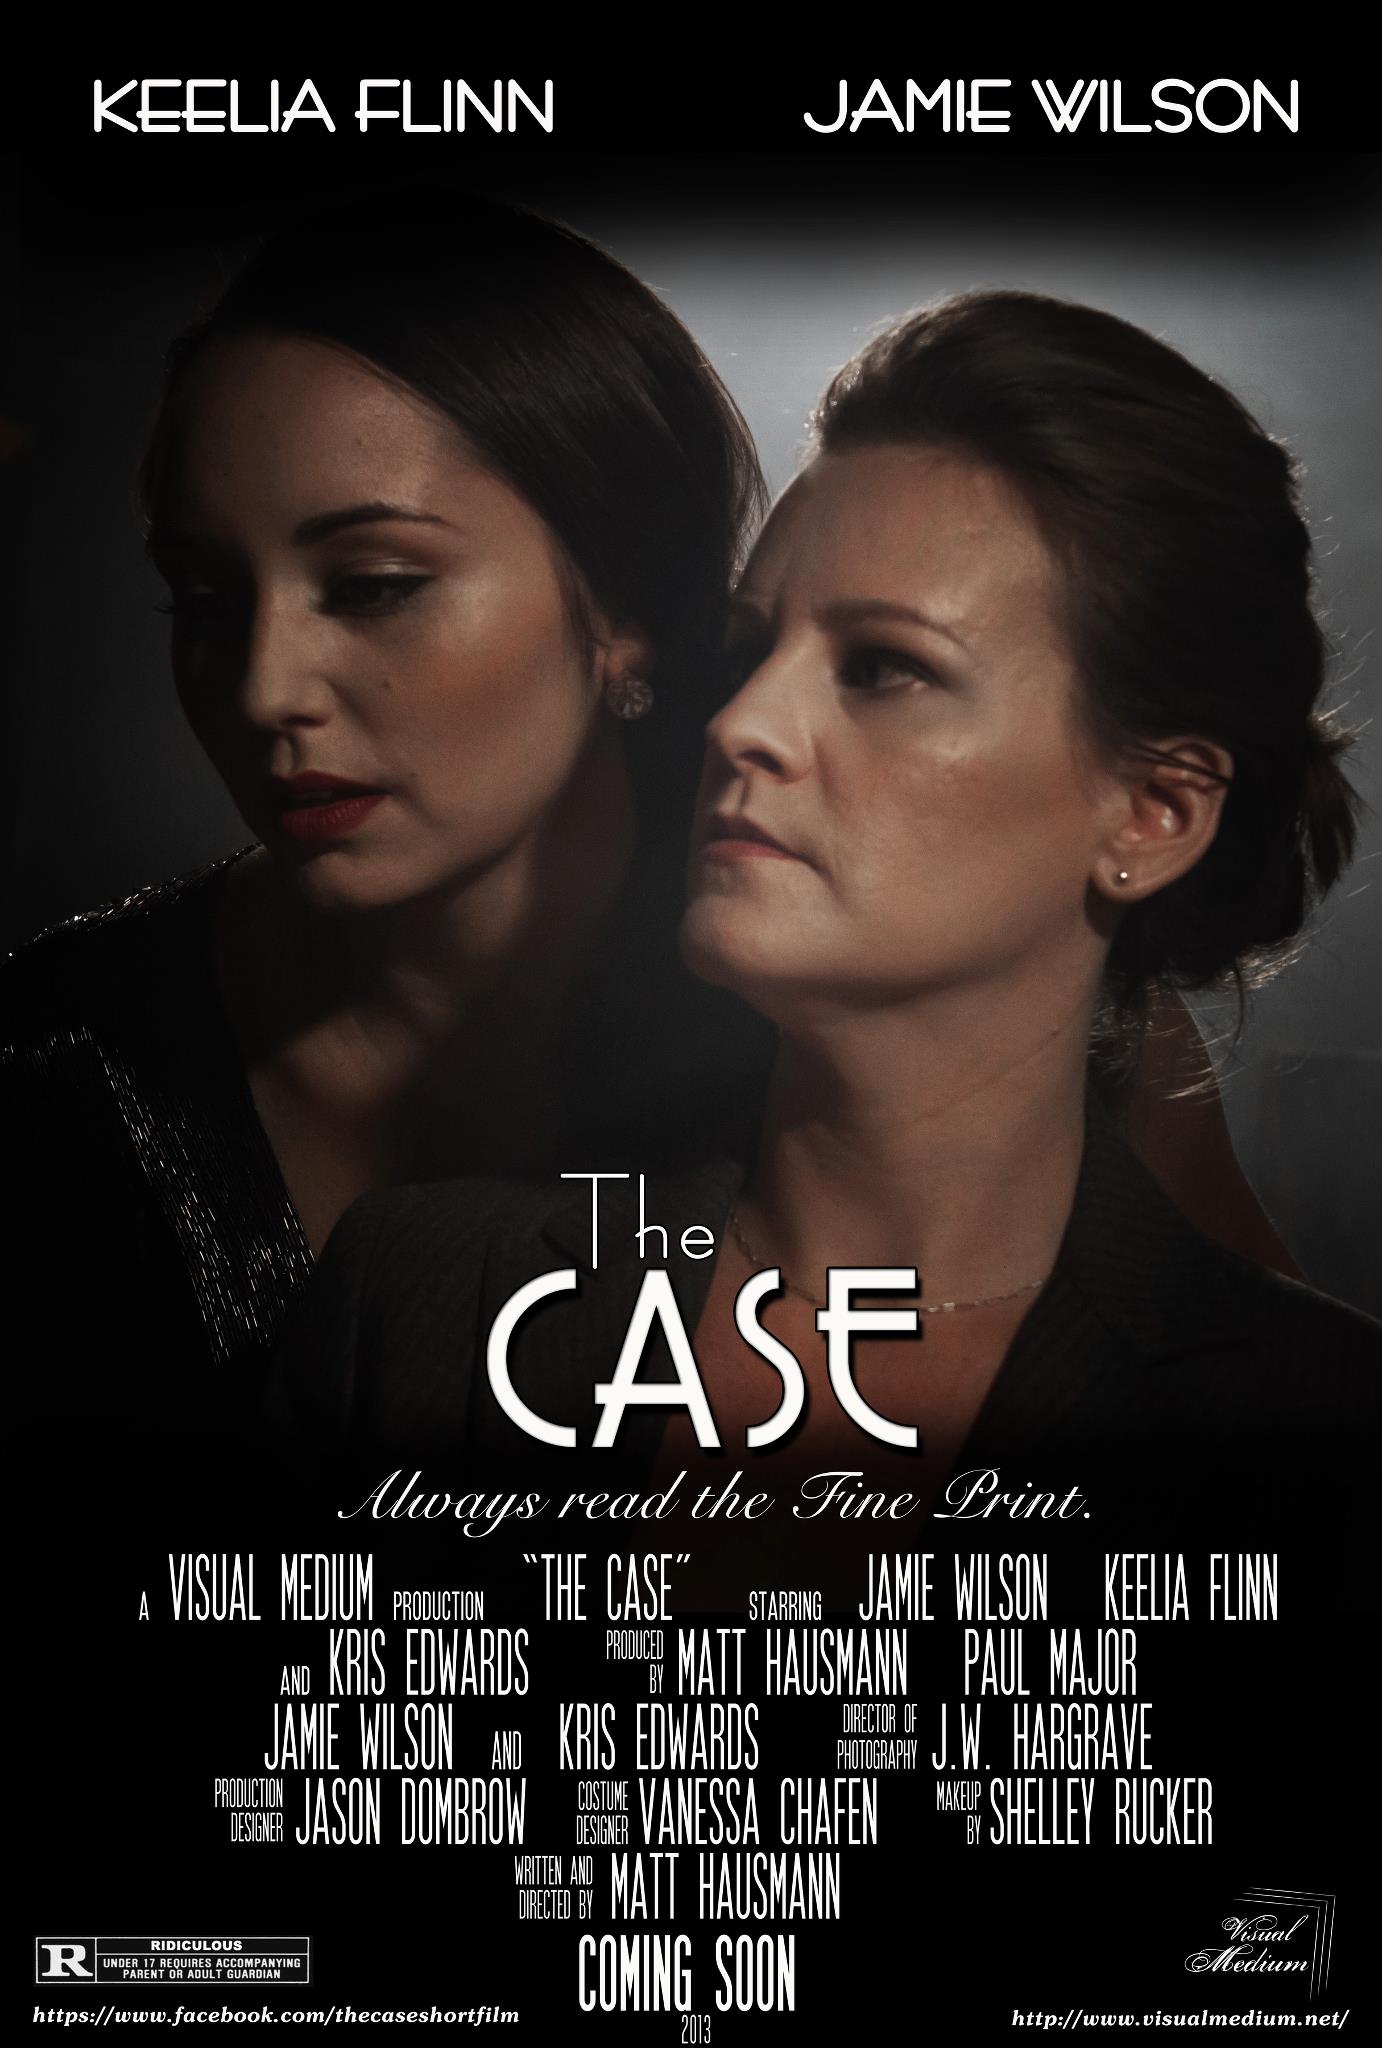 The Case movie poster.